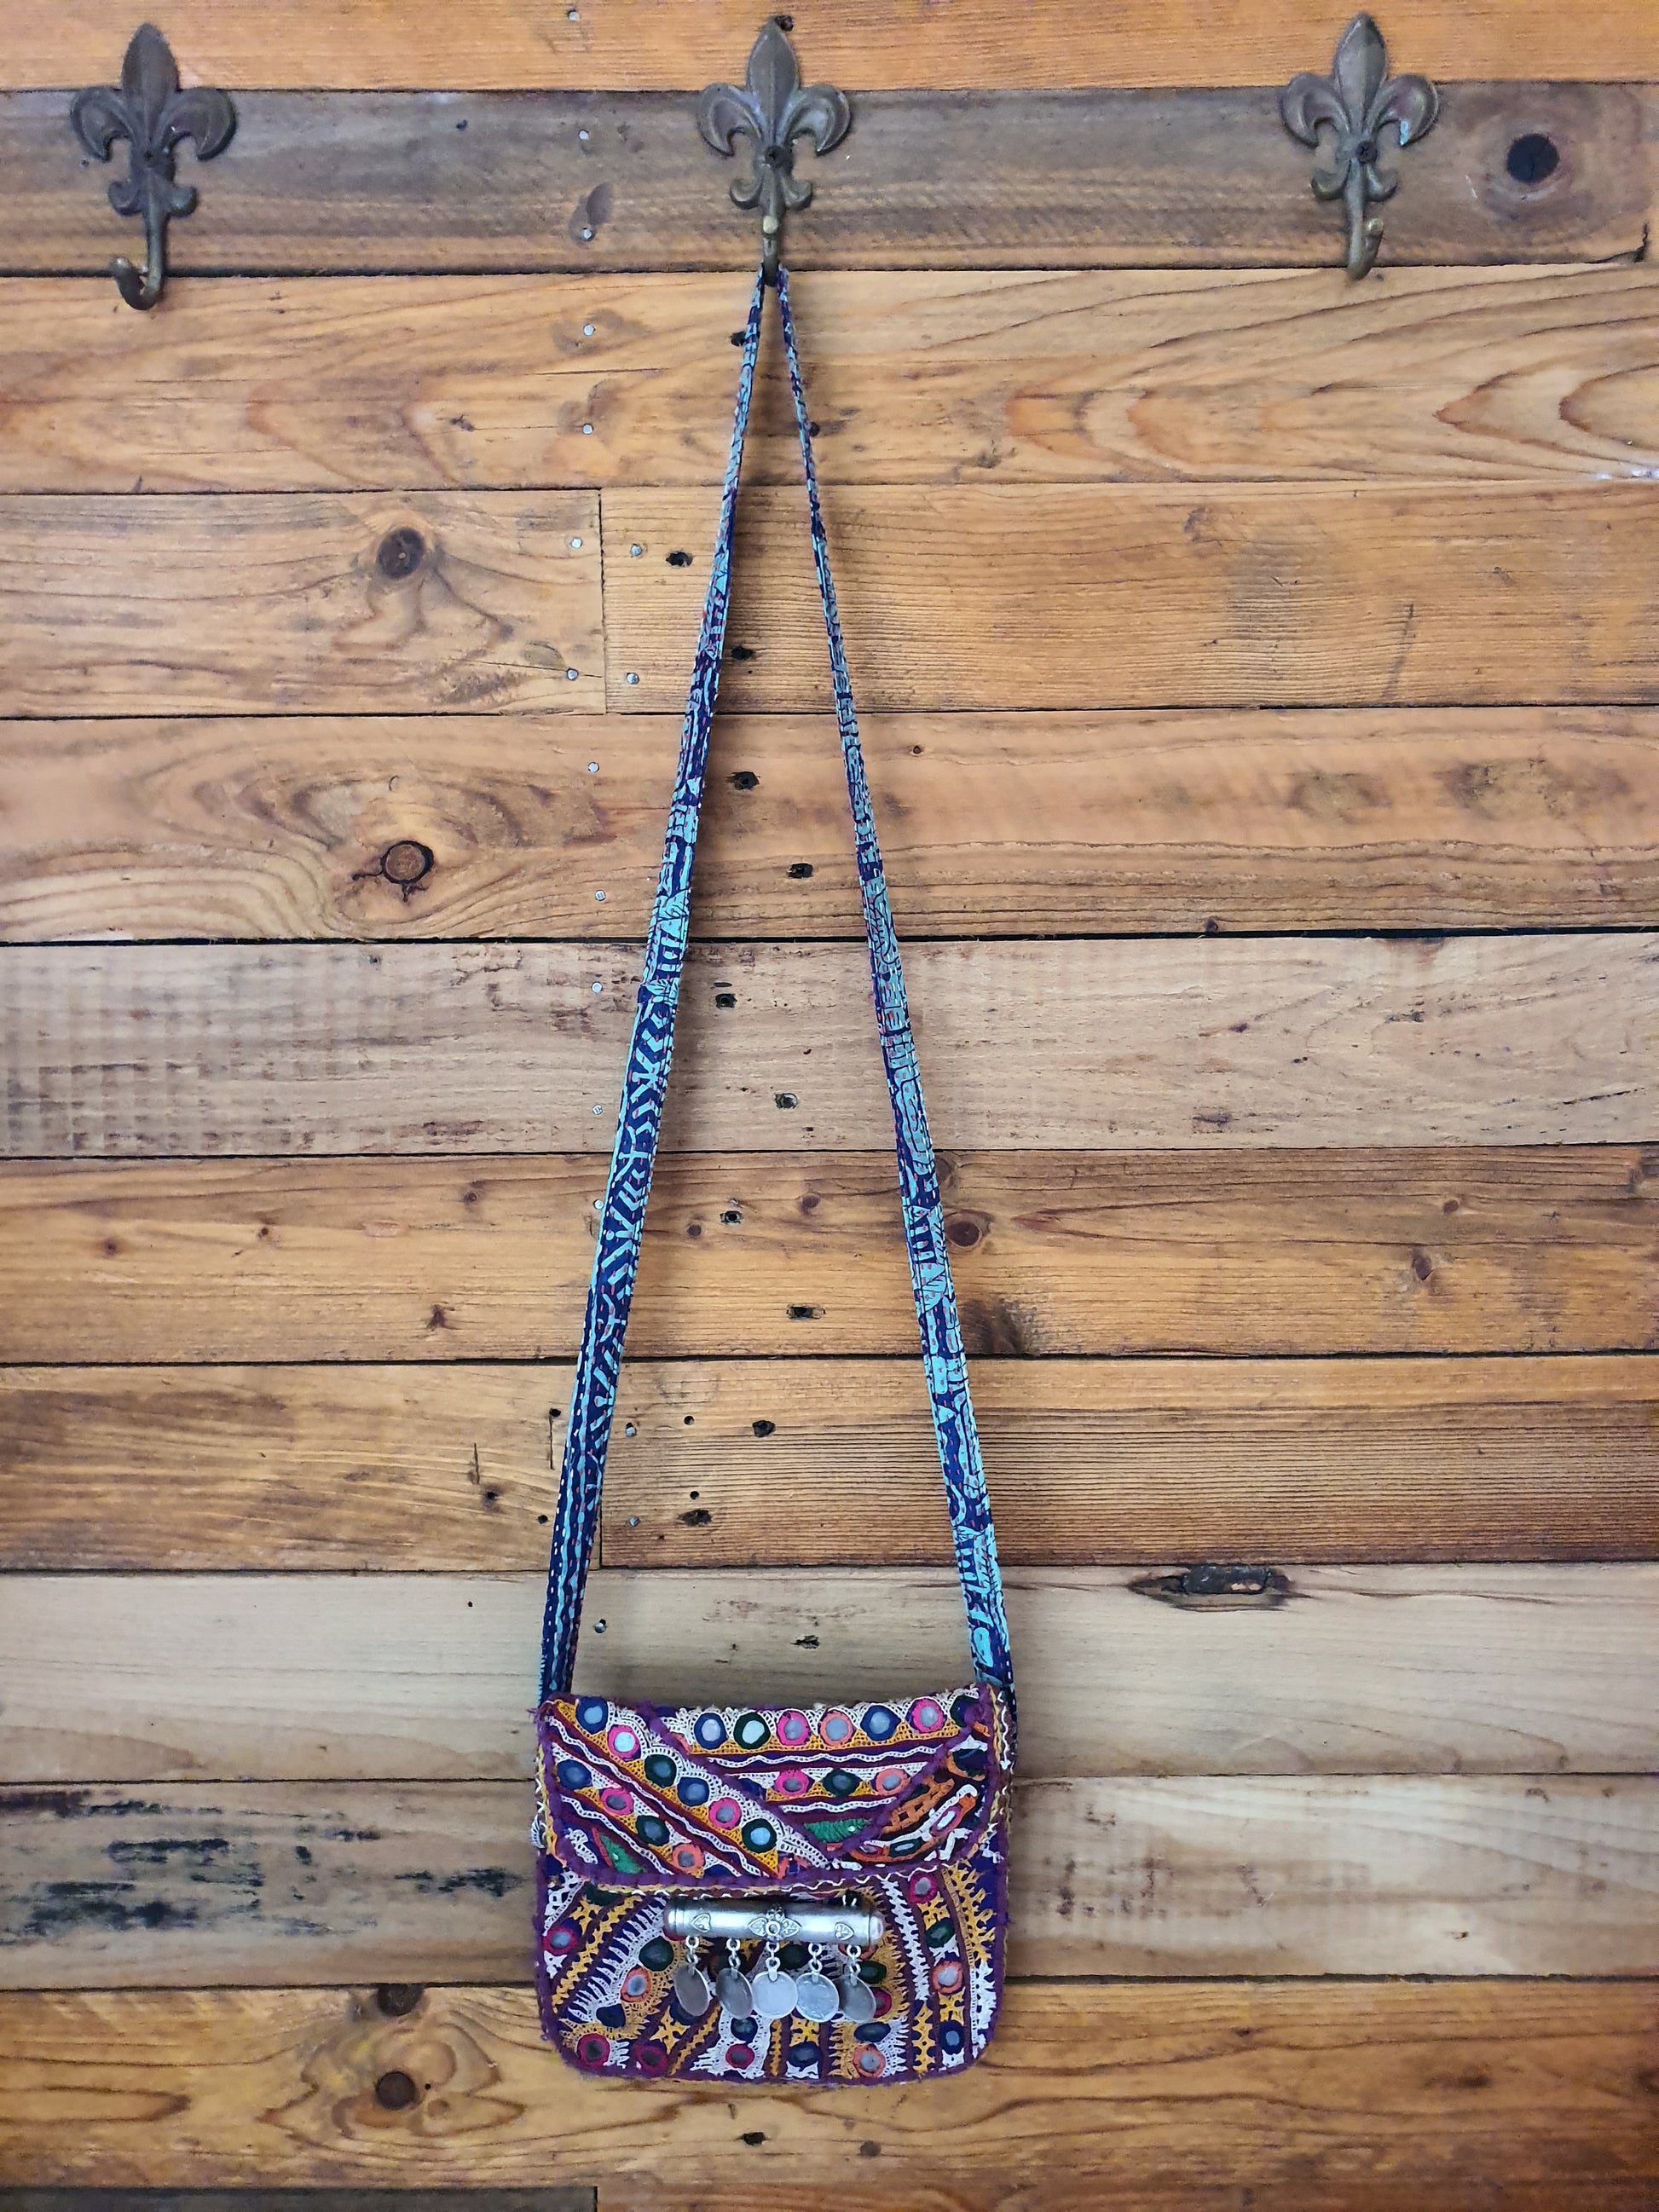 Mirror and embbroidered bag with cotton strap, metal adornment and key ring, pockets, colourful and light weight